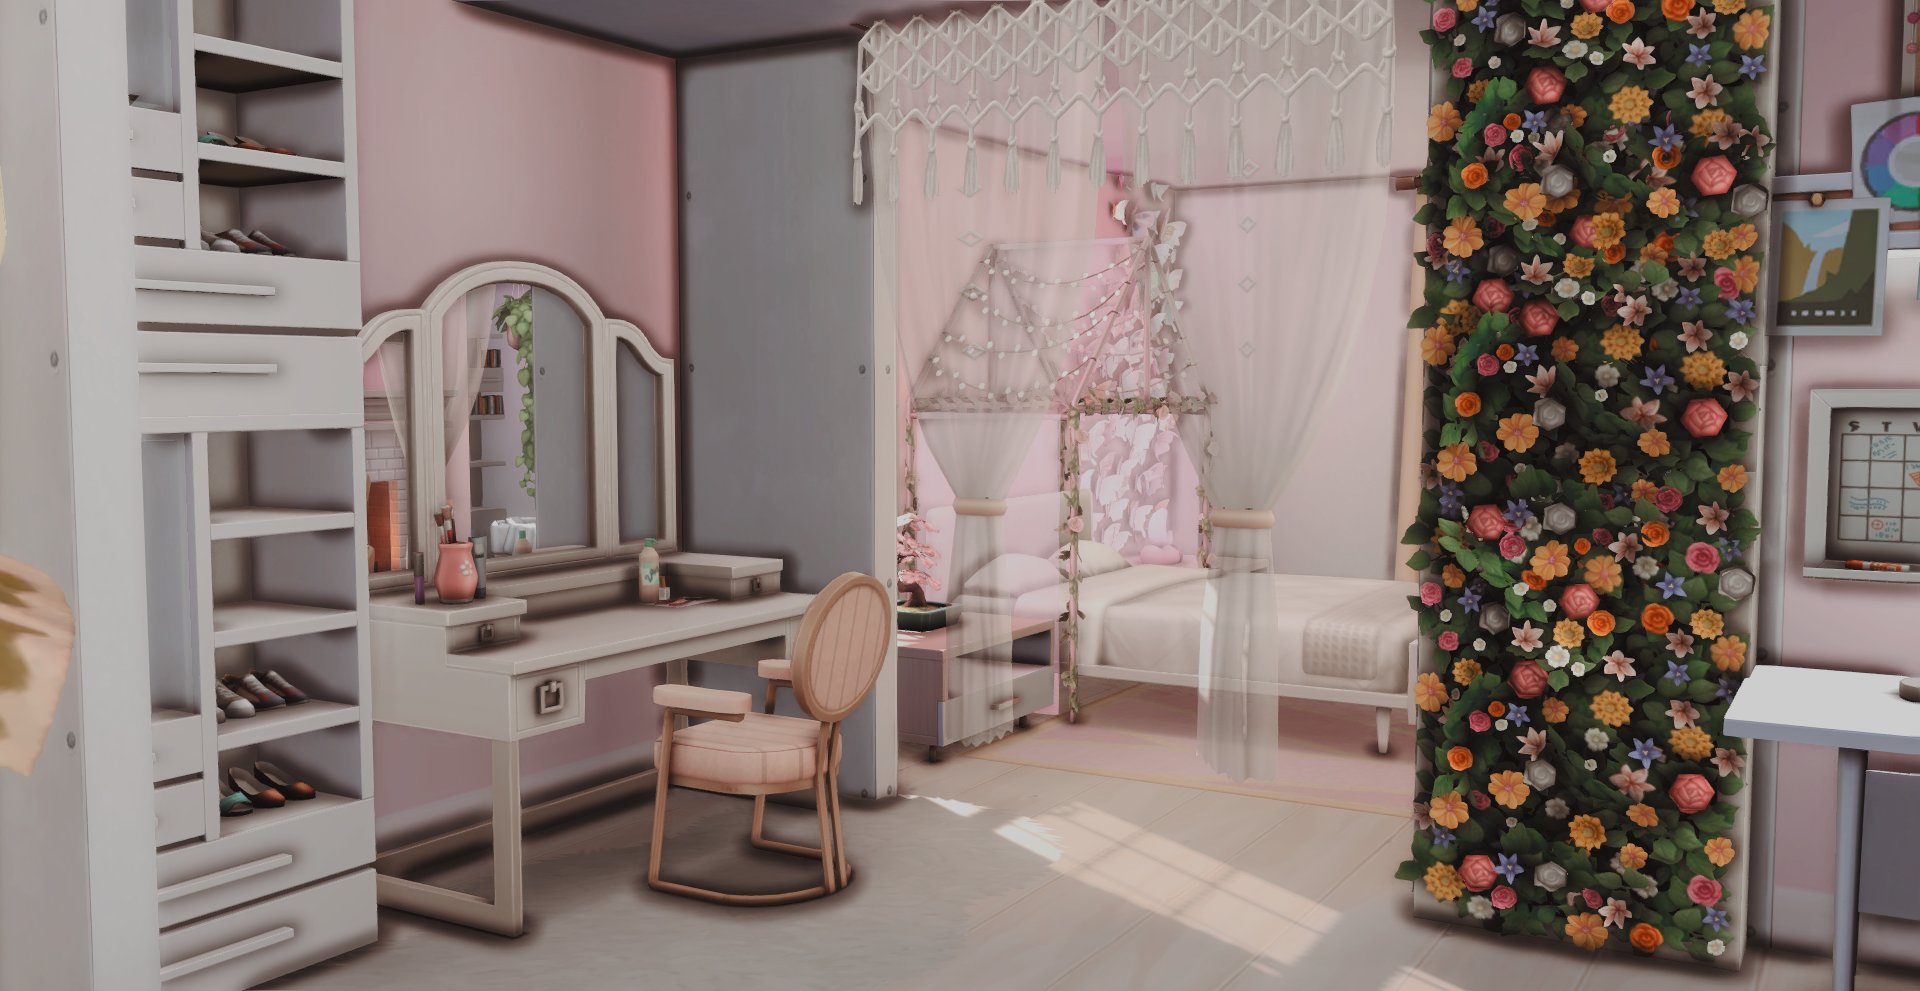 PINK TUMBLR BEDROOM - The Sims 4 Rooms / Lots - CurseForge